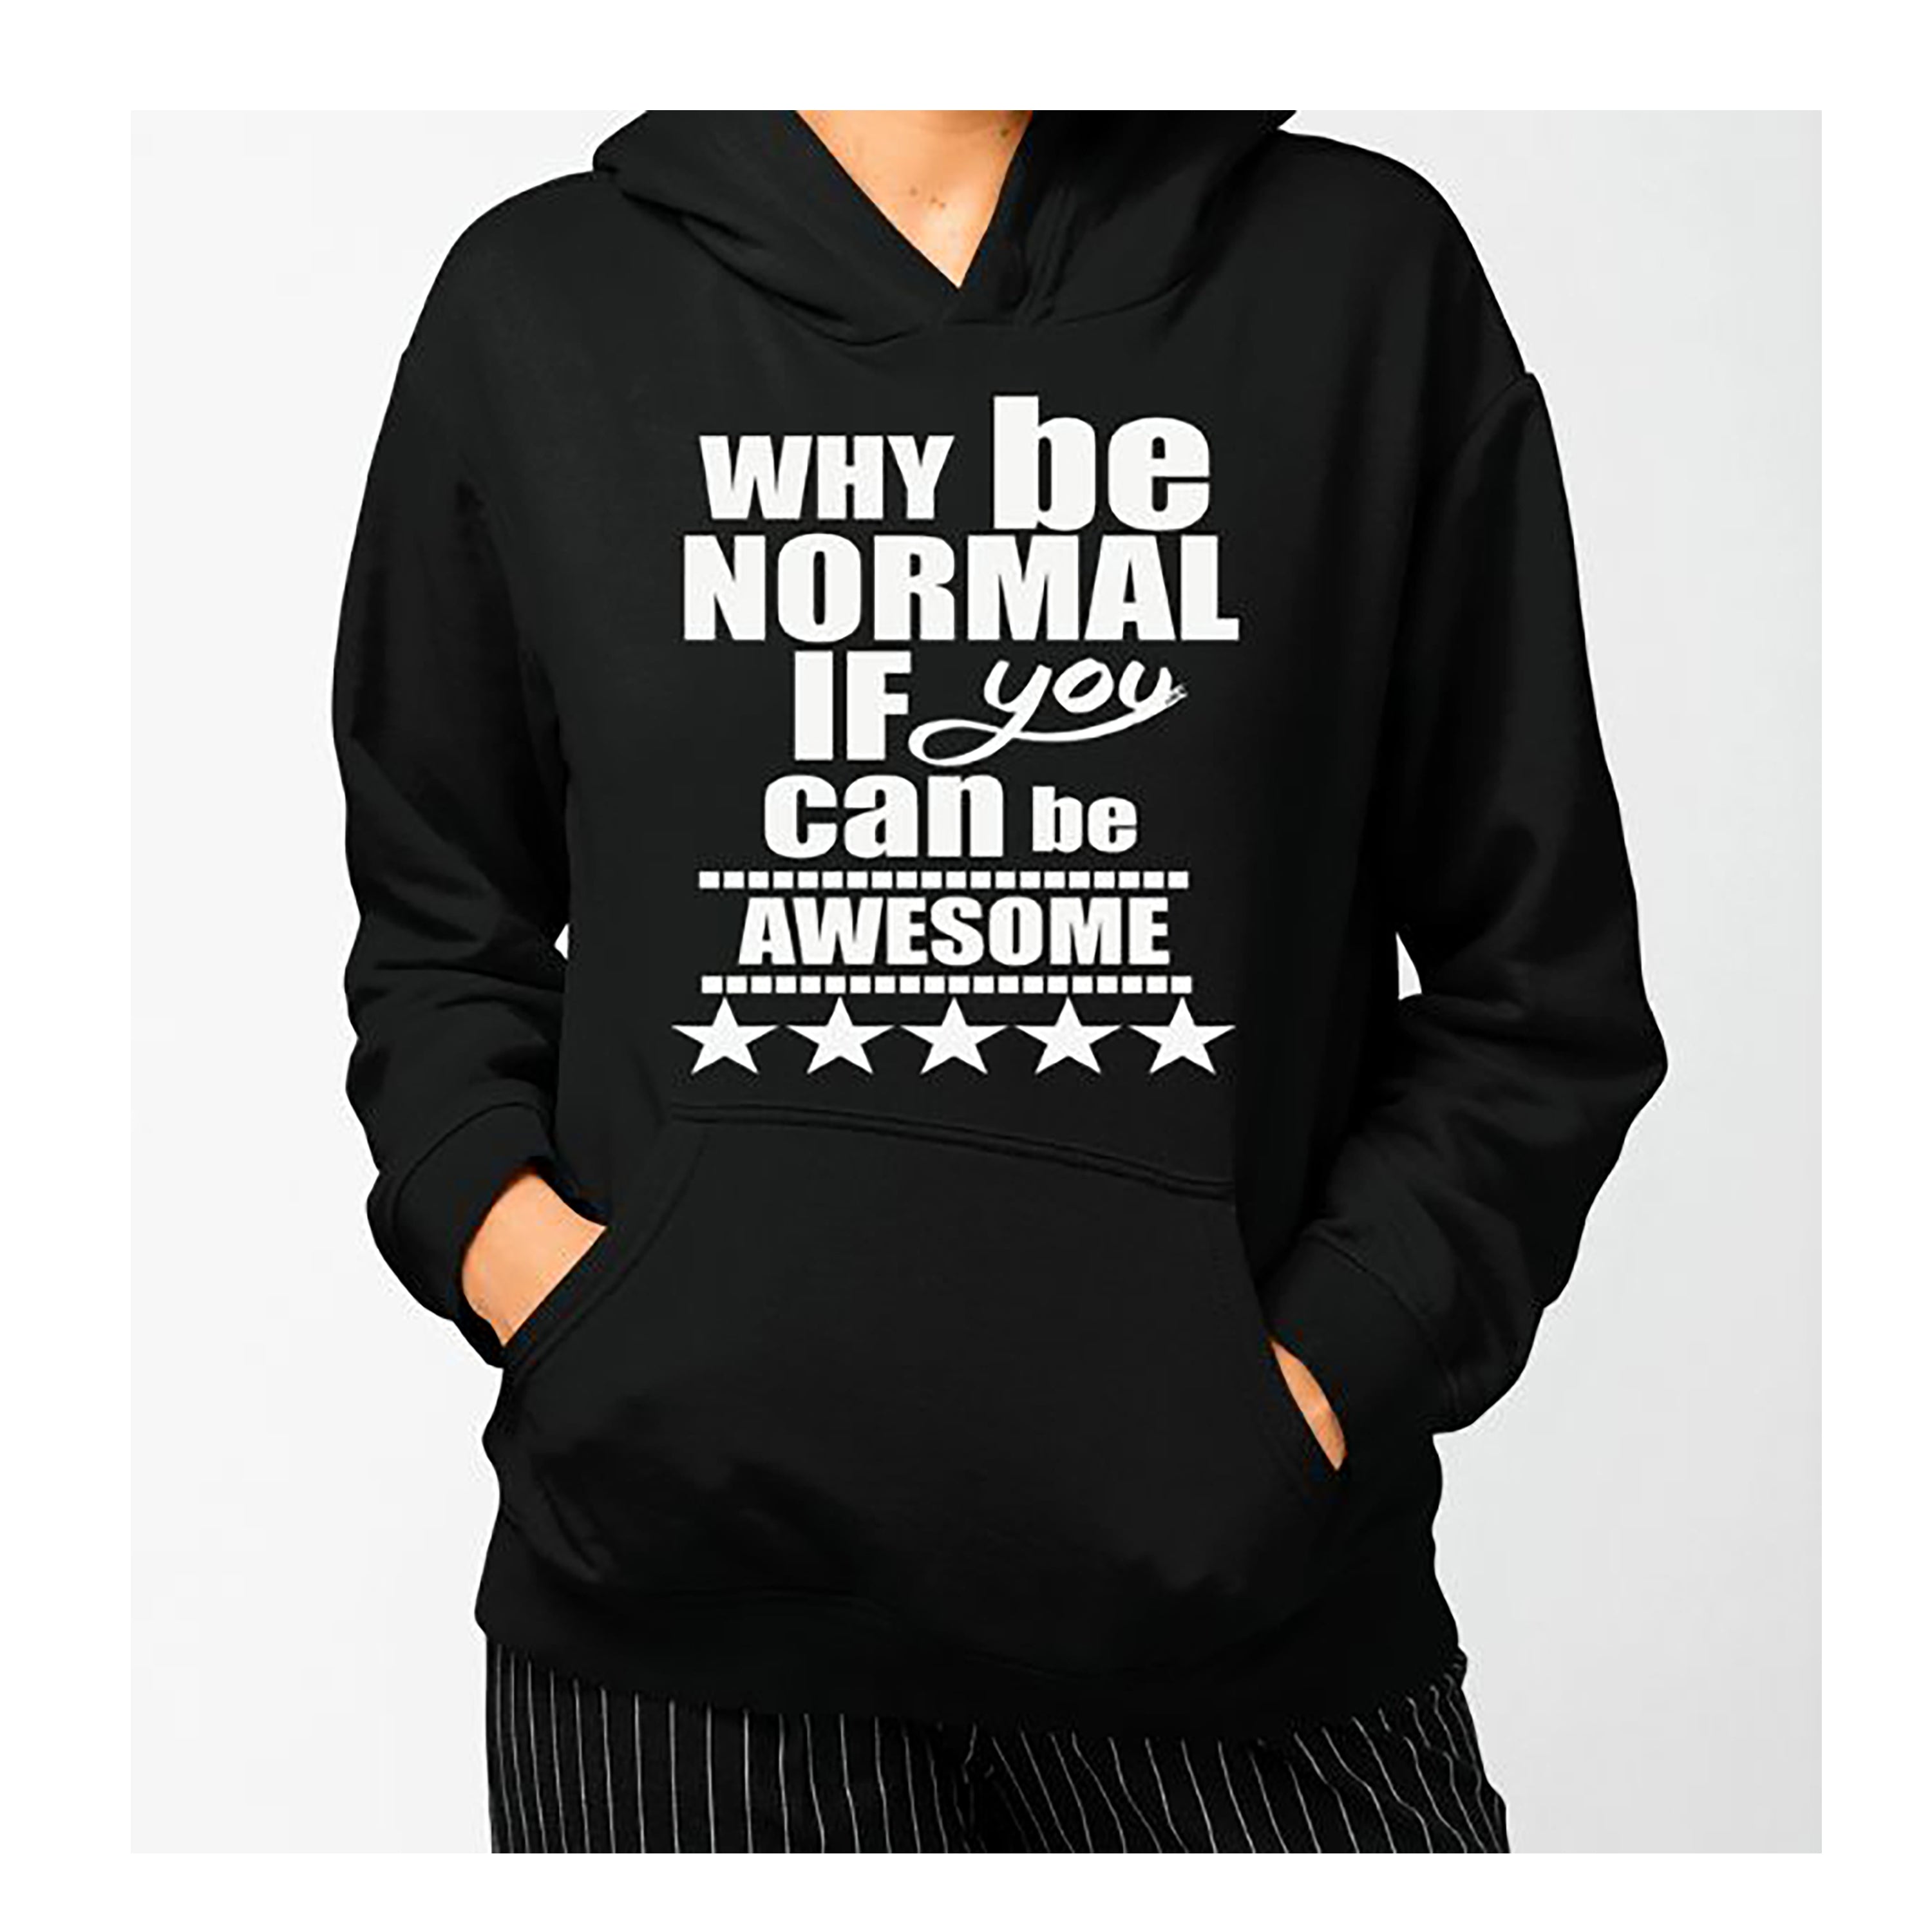 "Why Be Normal If You Can Be Awesome" Hoodie & Sweatshirt